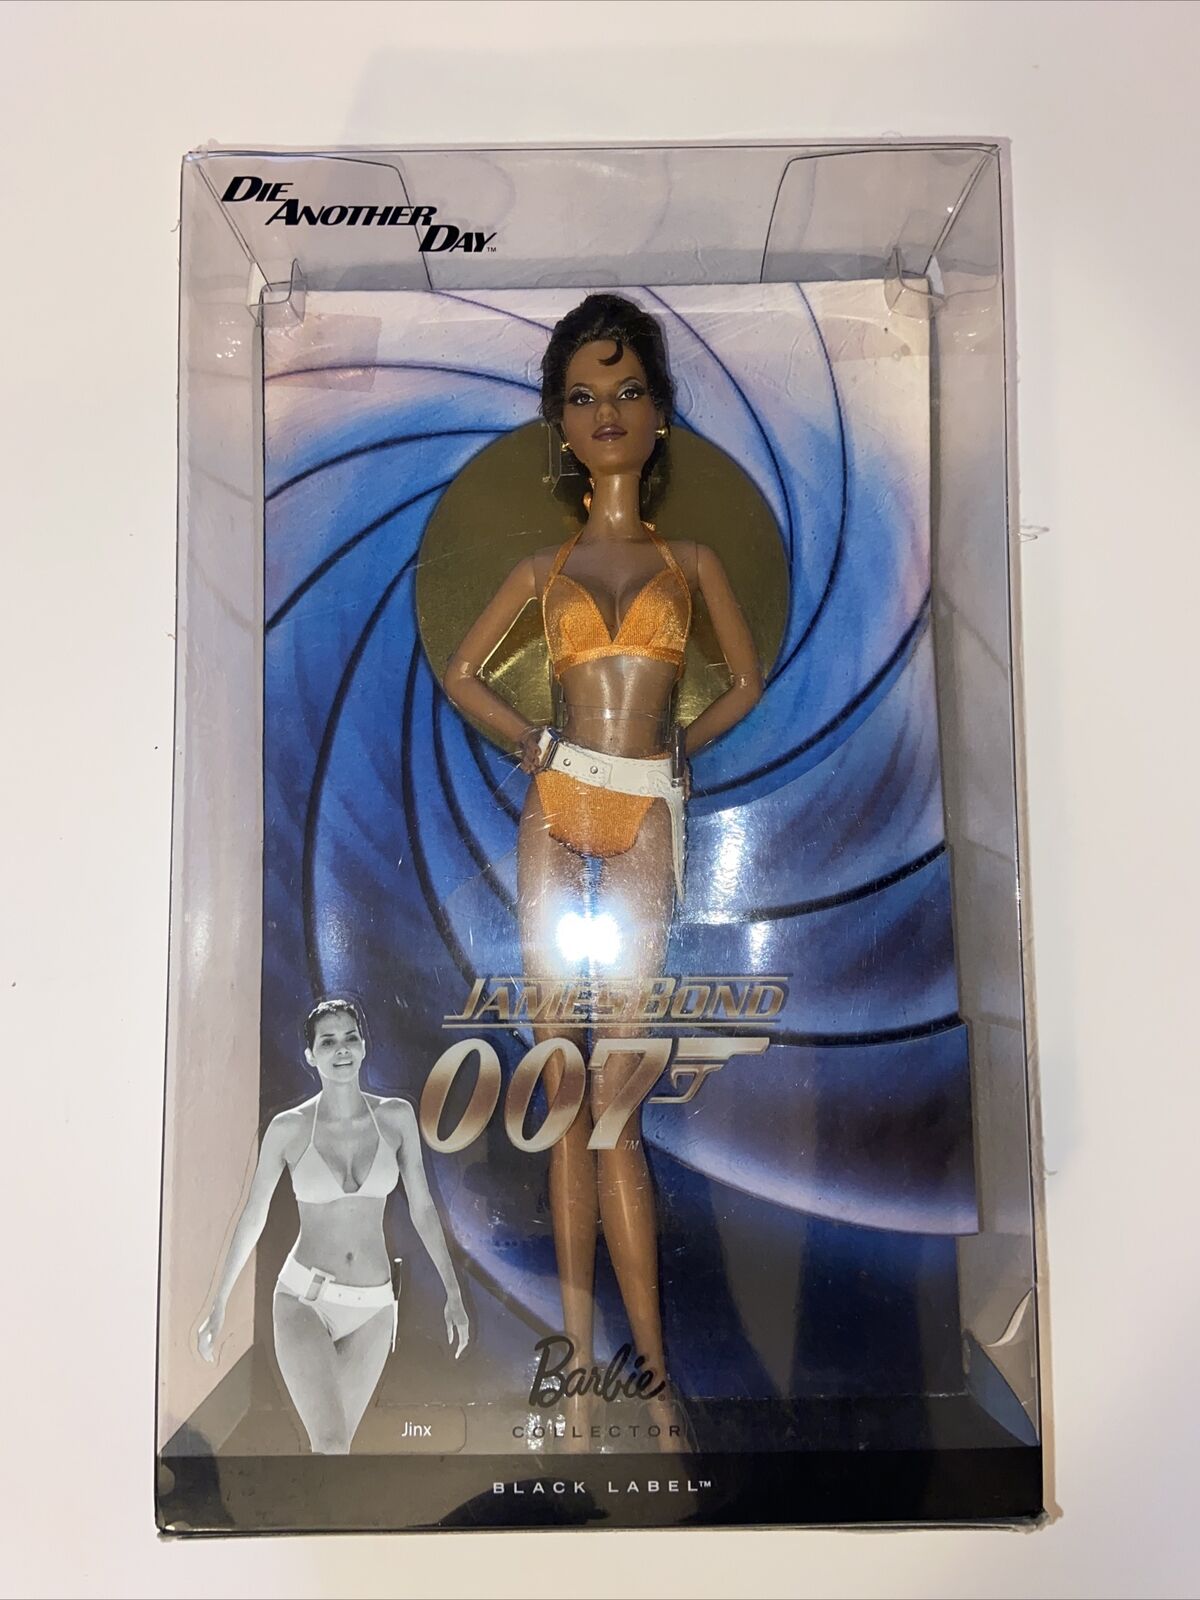 Barbie Collector Die Another Day Bond Girl Jinx Doll - New R4514 Halle Berry 007